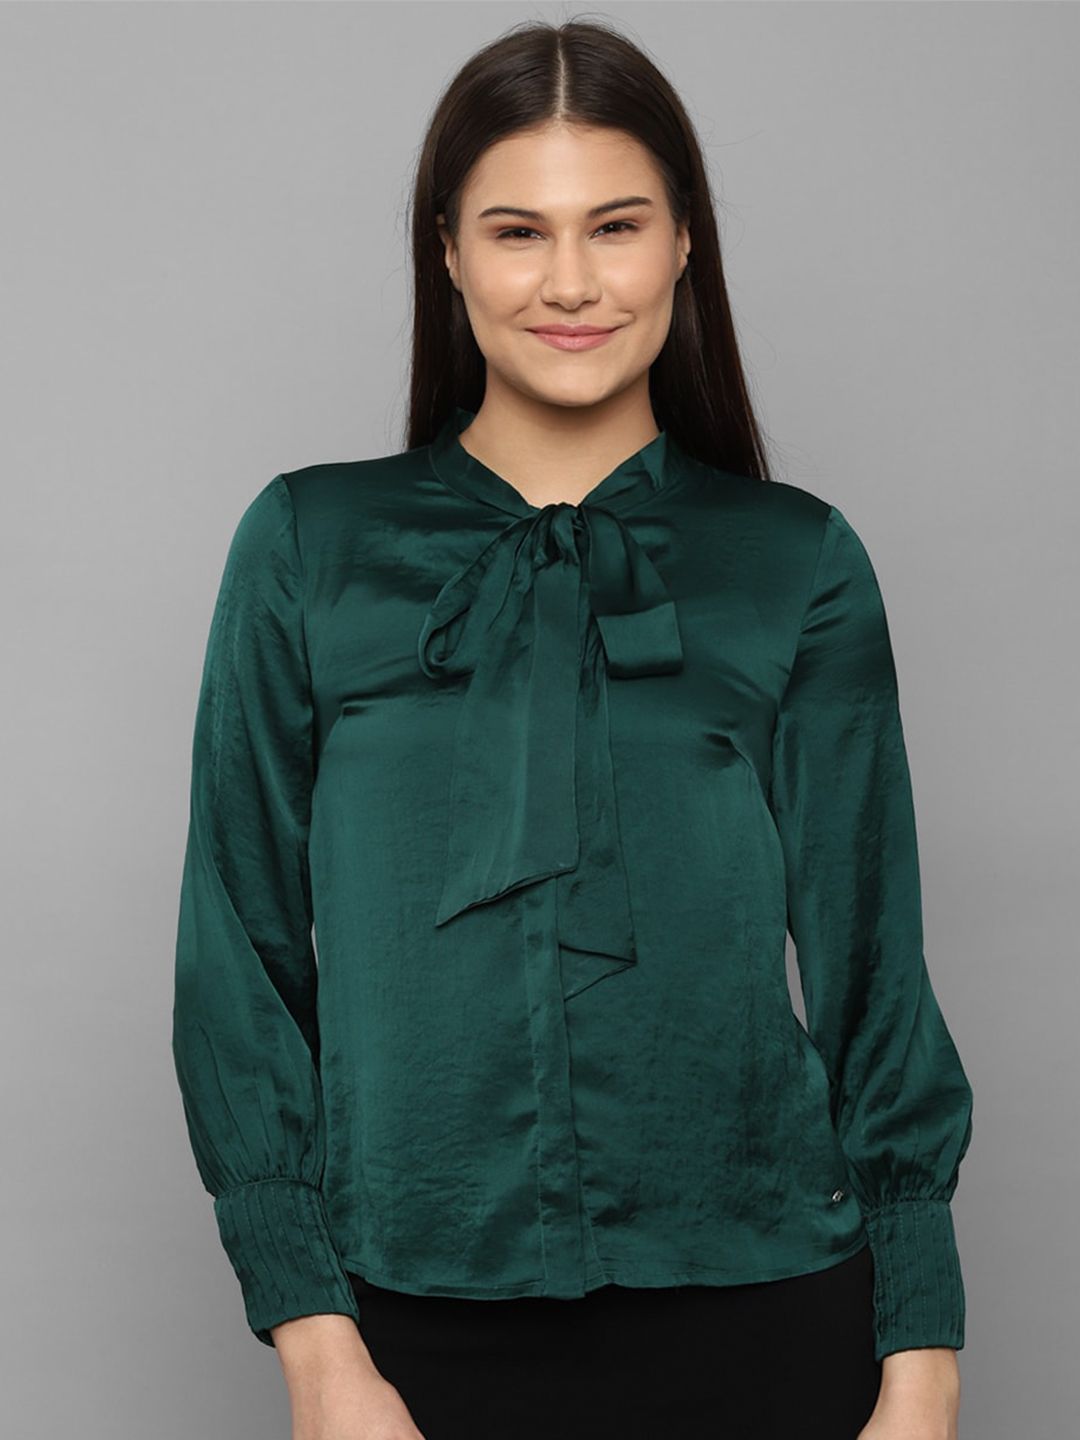 Allen Solly Tie-Up Neck Shirt Style Top Price in India